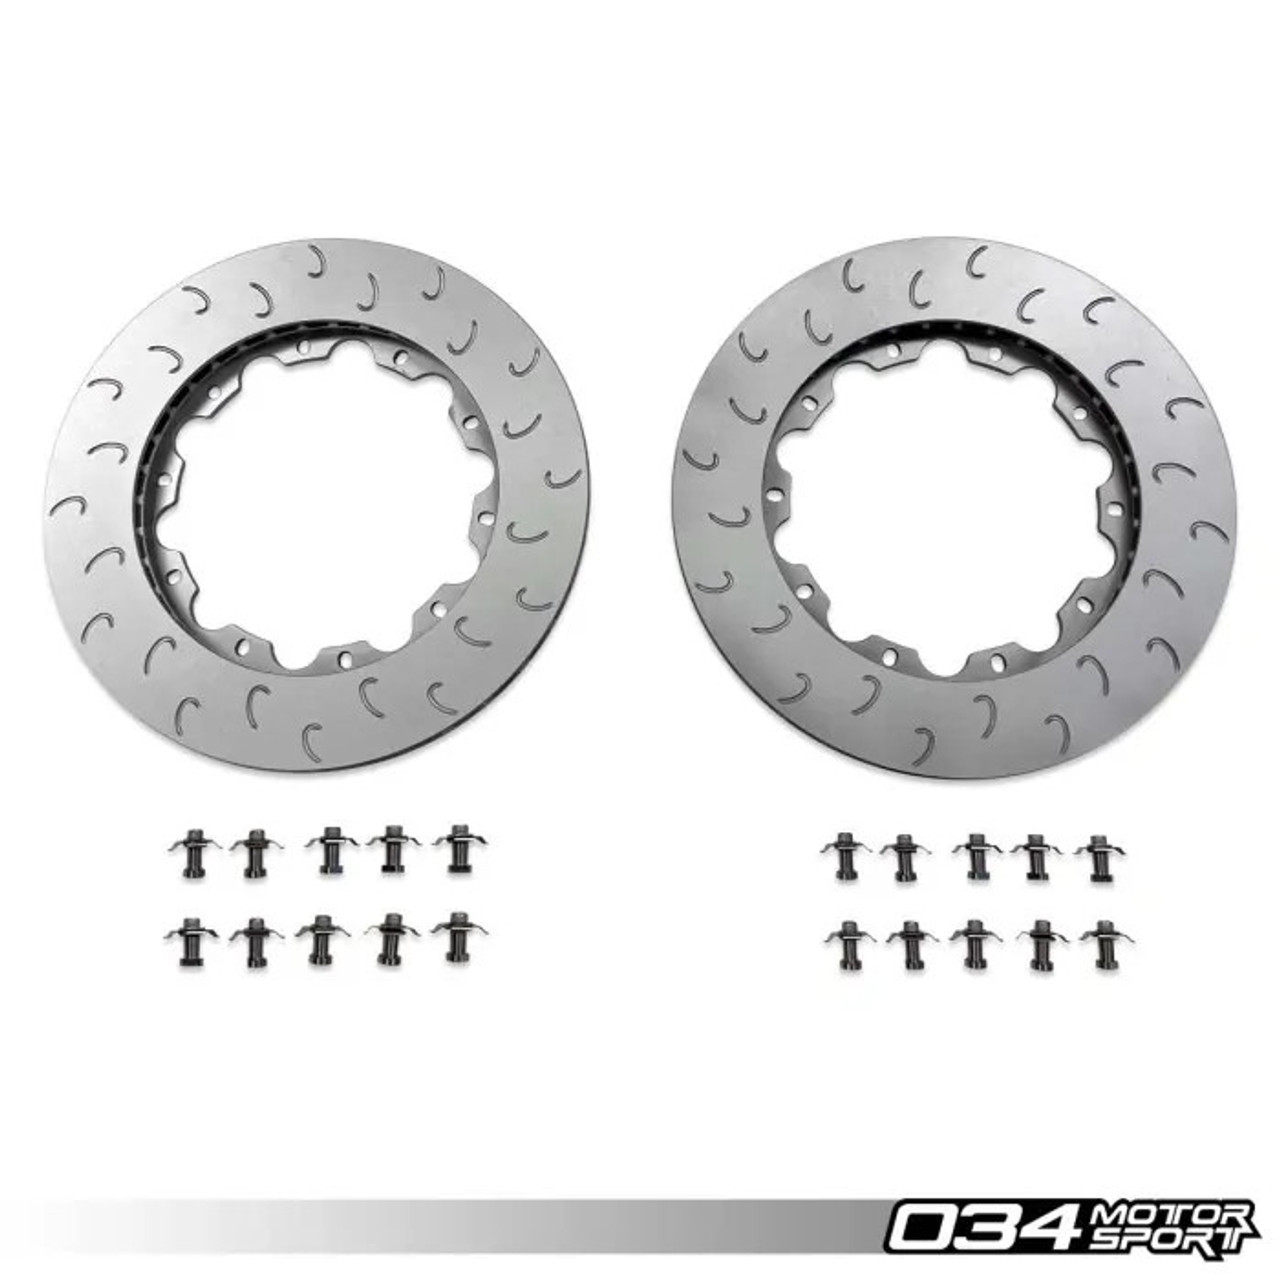 034Motorsport 355mm Replacement Rear Rotor Ring Set for MK8 Golf R & 8Y S3